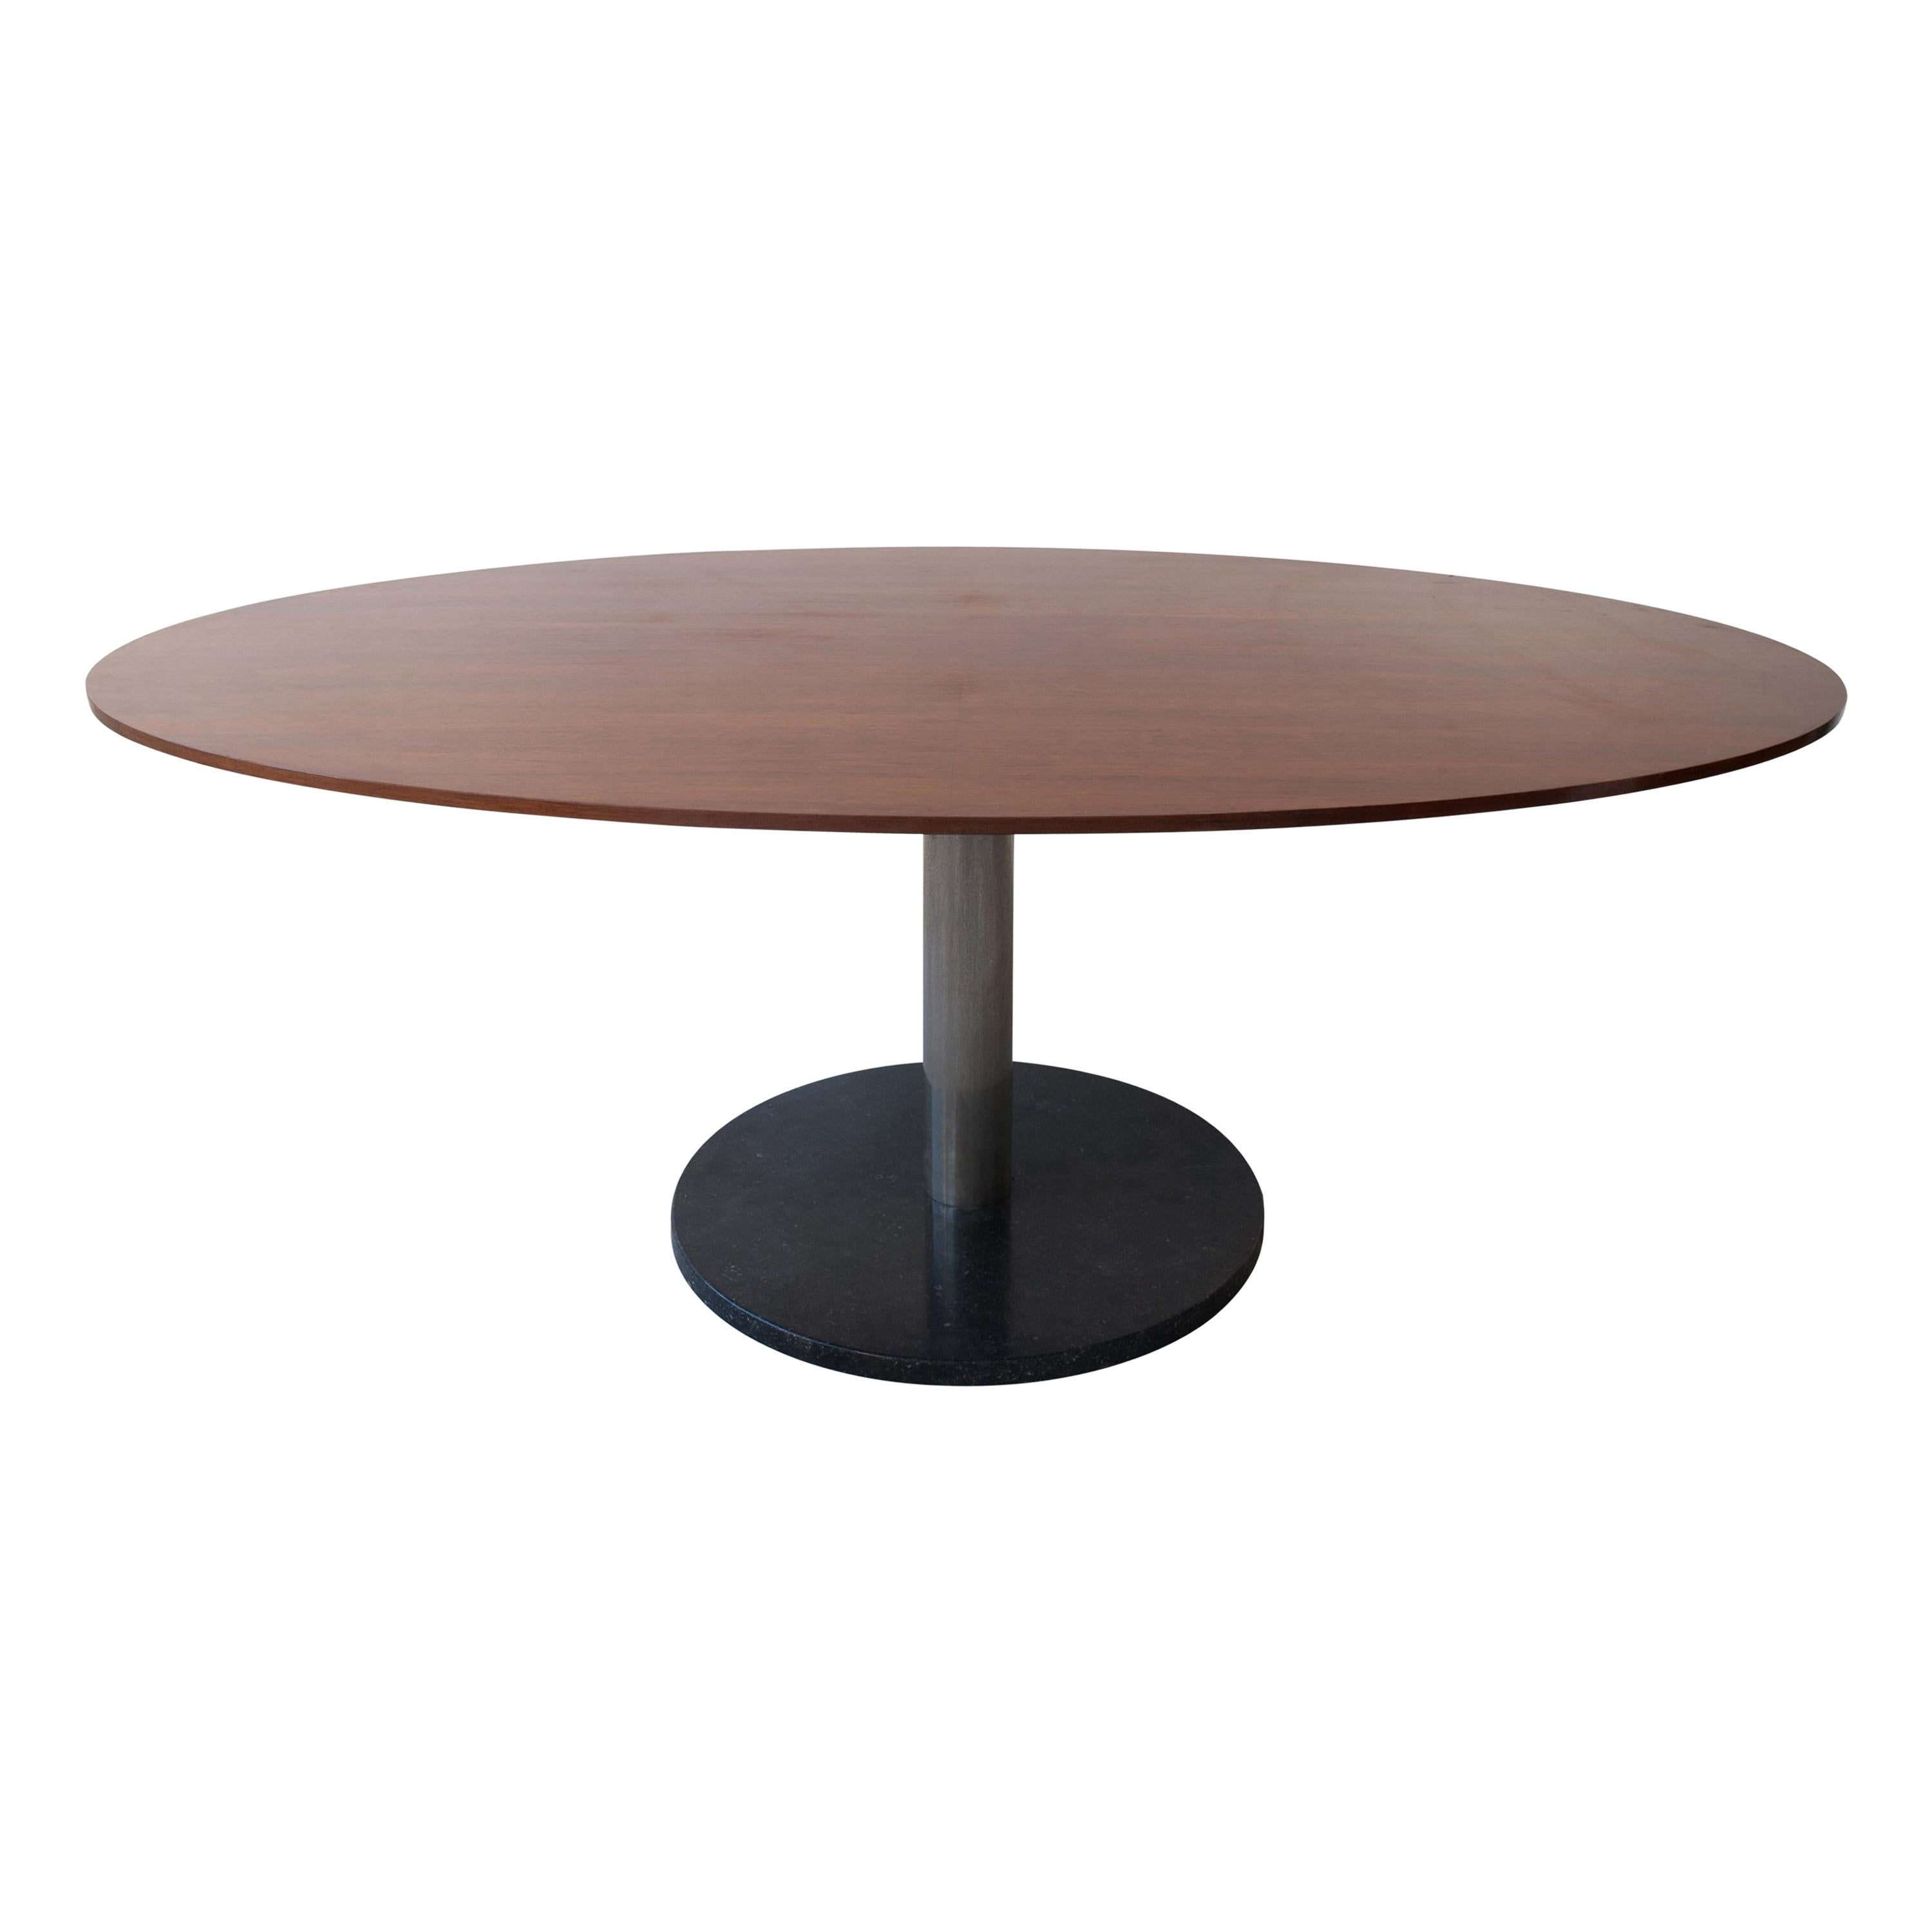 Alfred Hendrickx Oval Shaped Walnut Dining Table, Belgium Design, 1962 For Sale